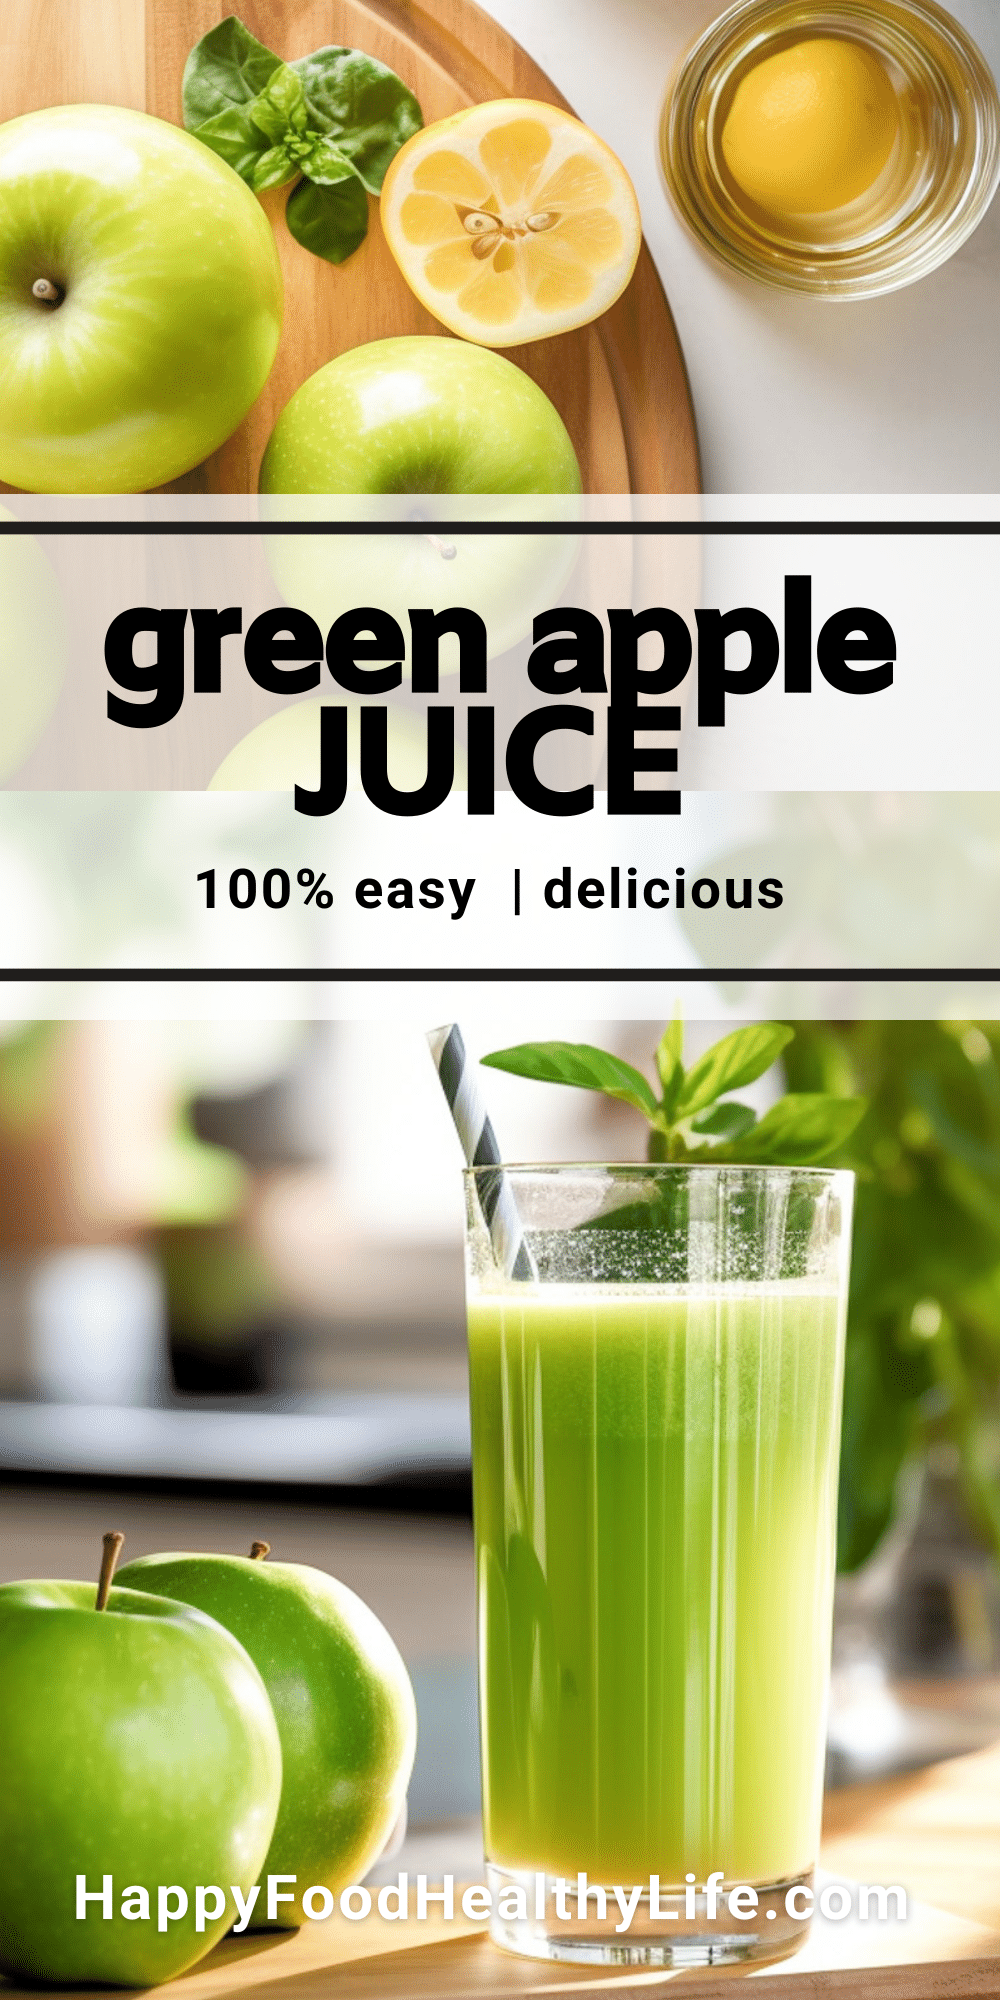 tall glass of green liquid with a straw and two apples to the left, also a cutting board of two green apples and a lemon with text overlay green apple juice